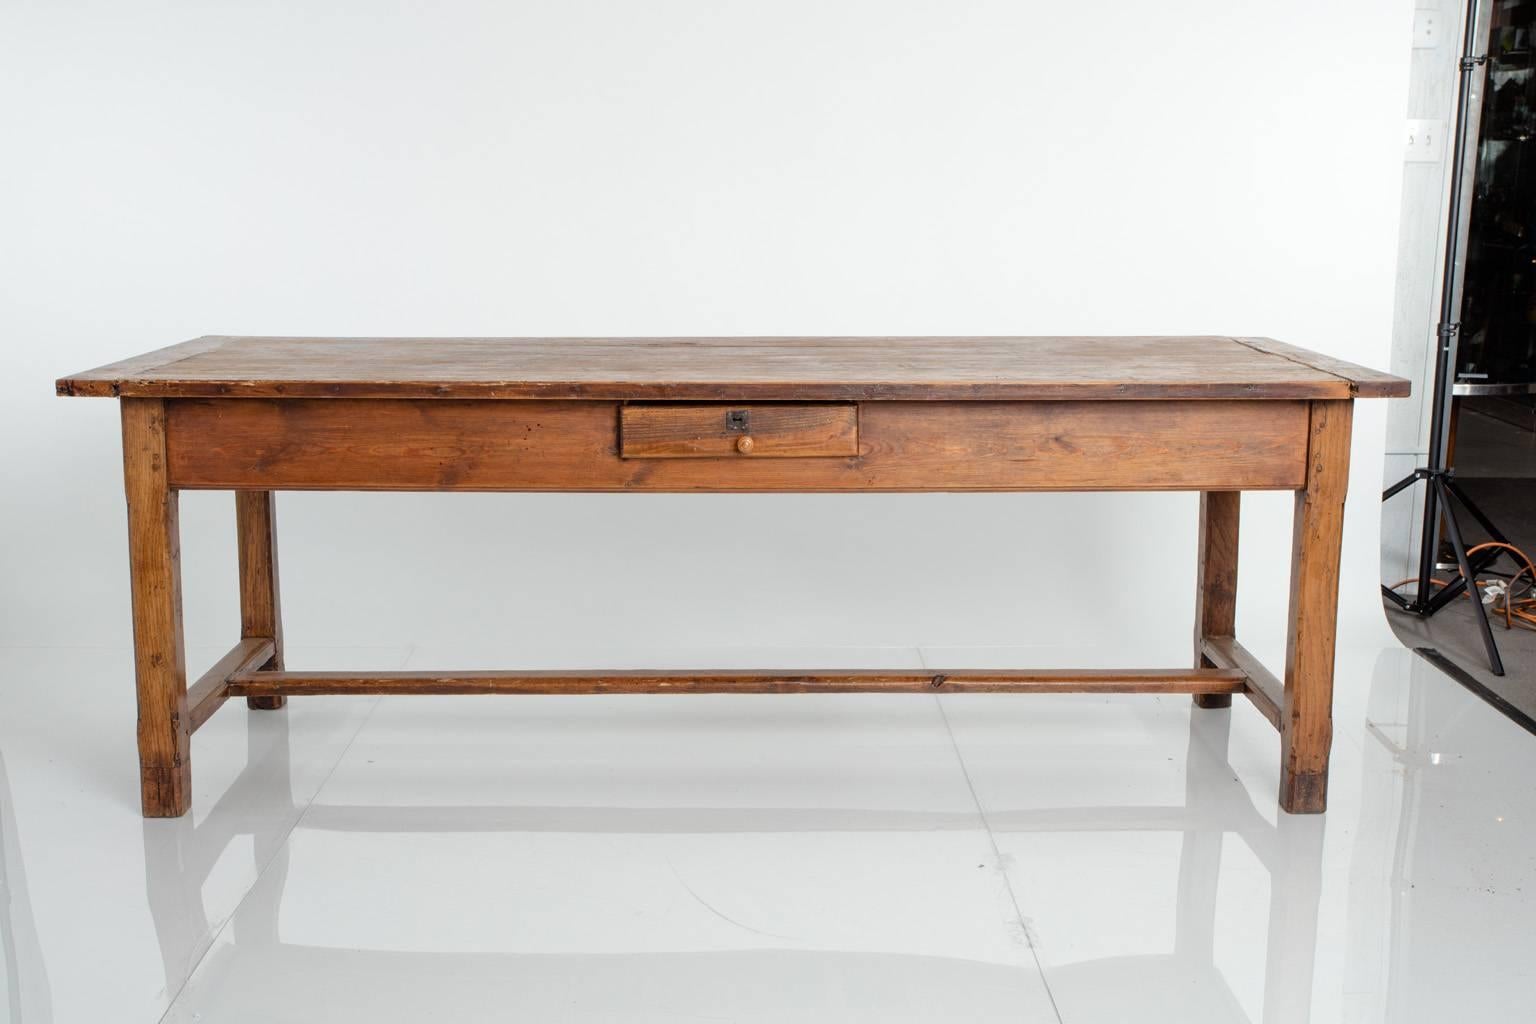 Early 19th century, French pine farm table. Three drawers. Breadboard ends.